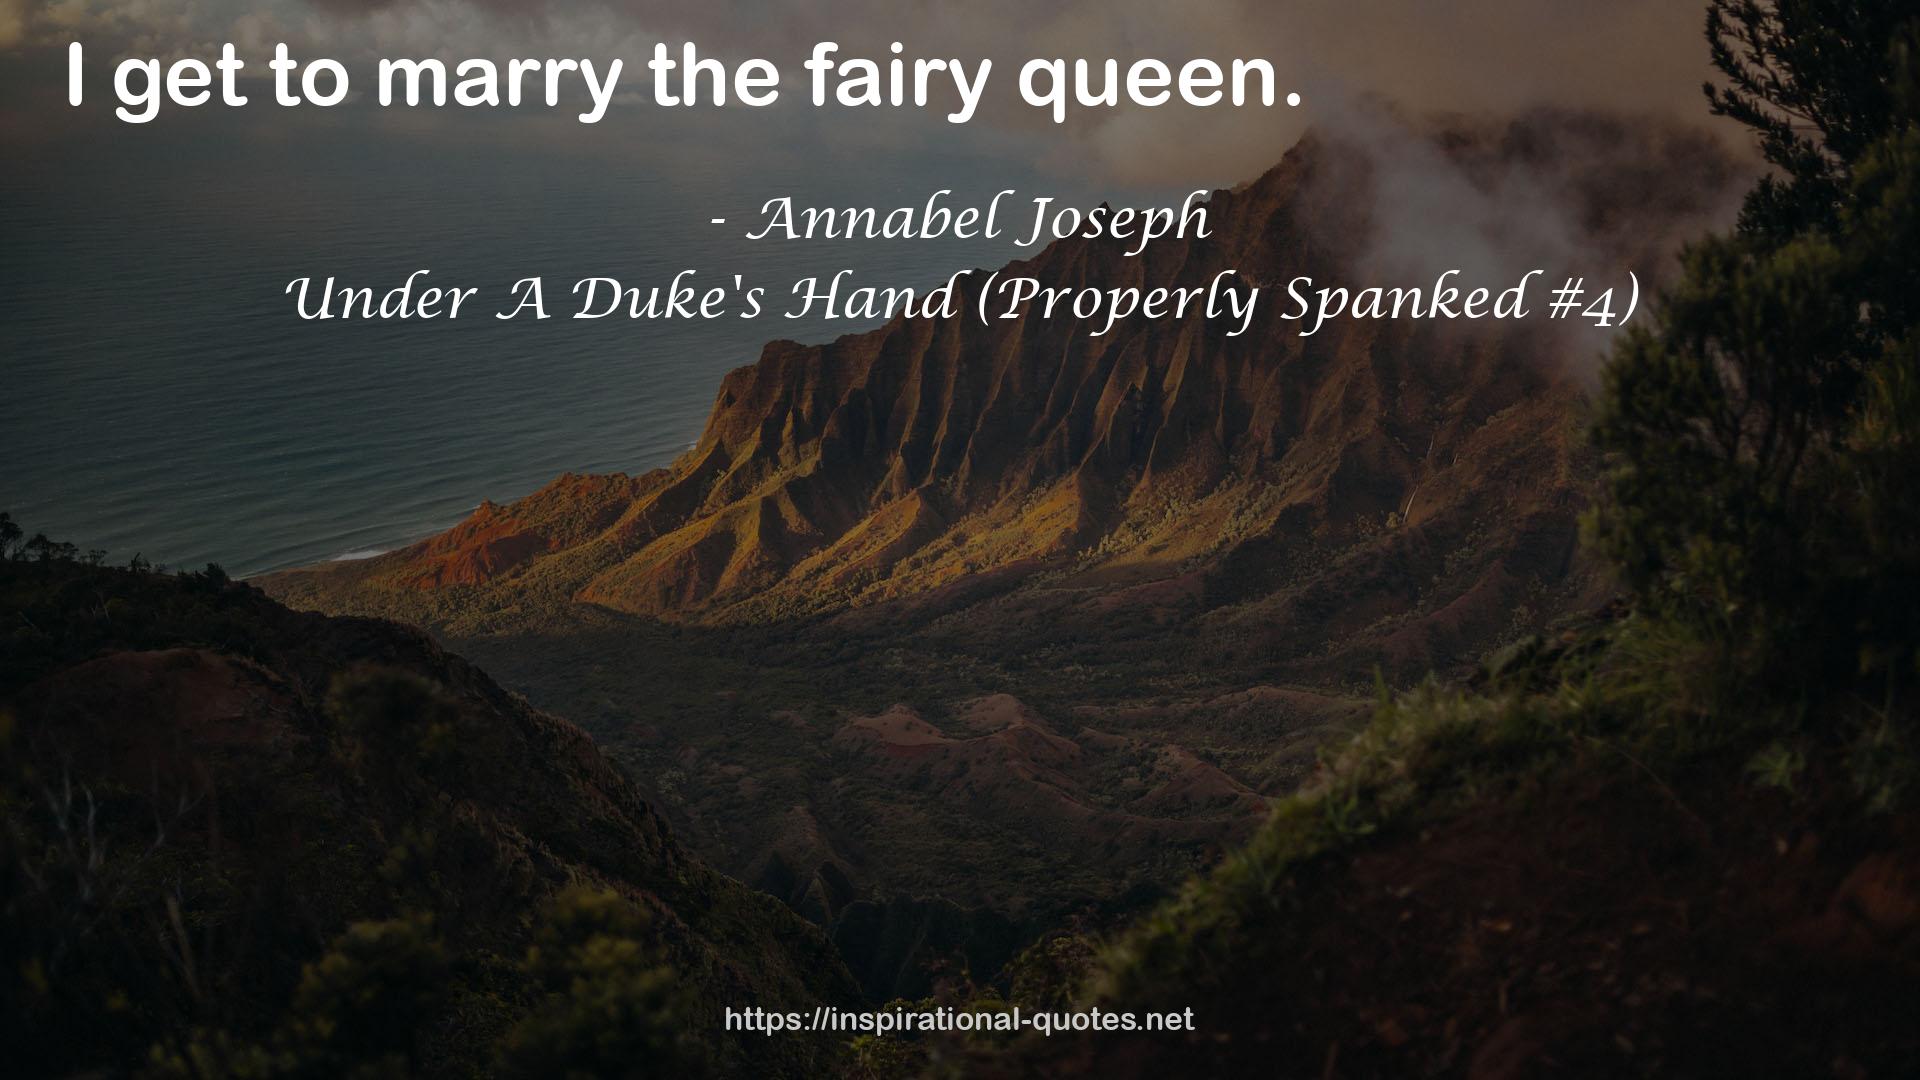 Under A Duke's Hand (Properly Spanked #4) QUOTES